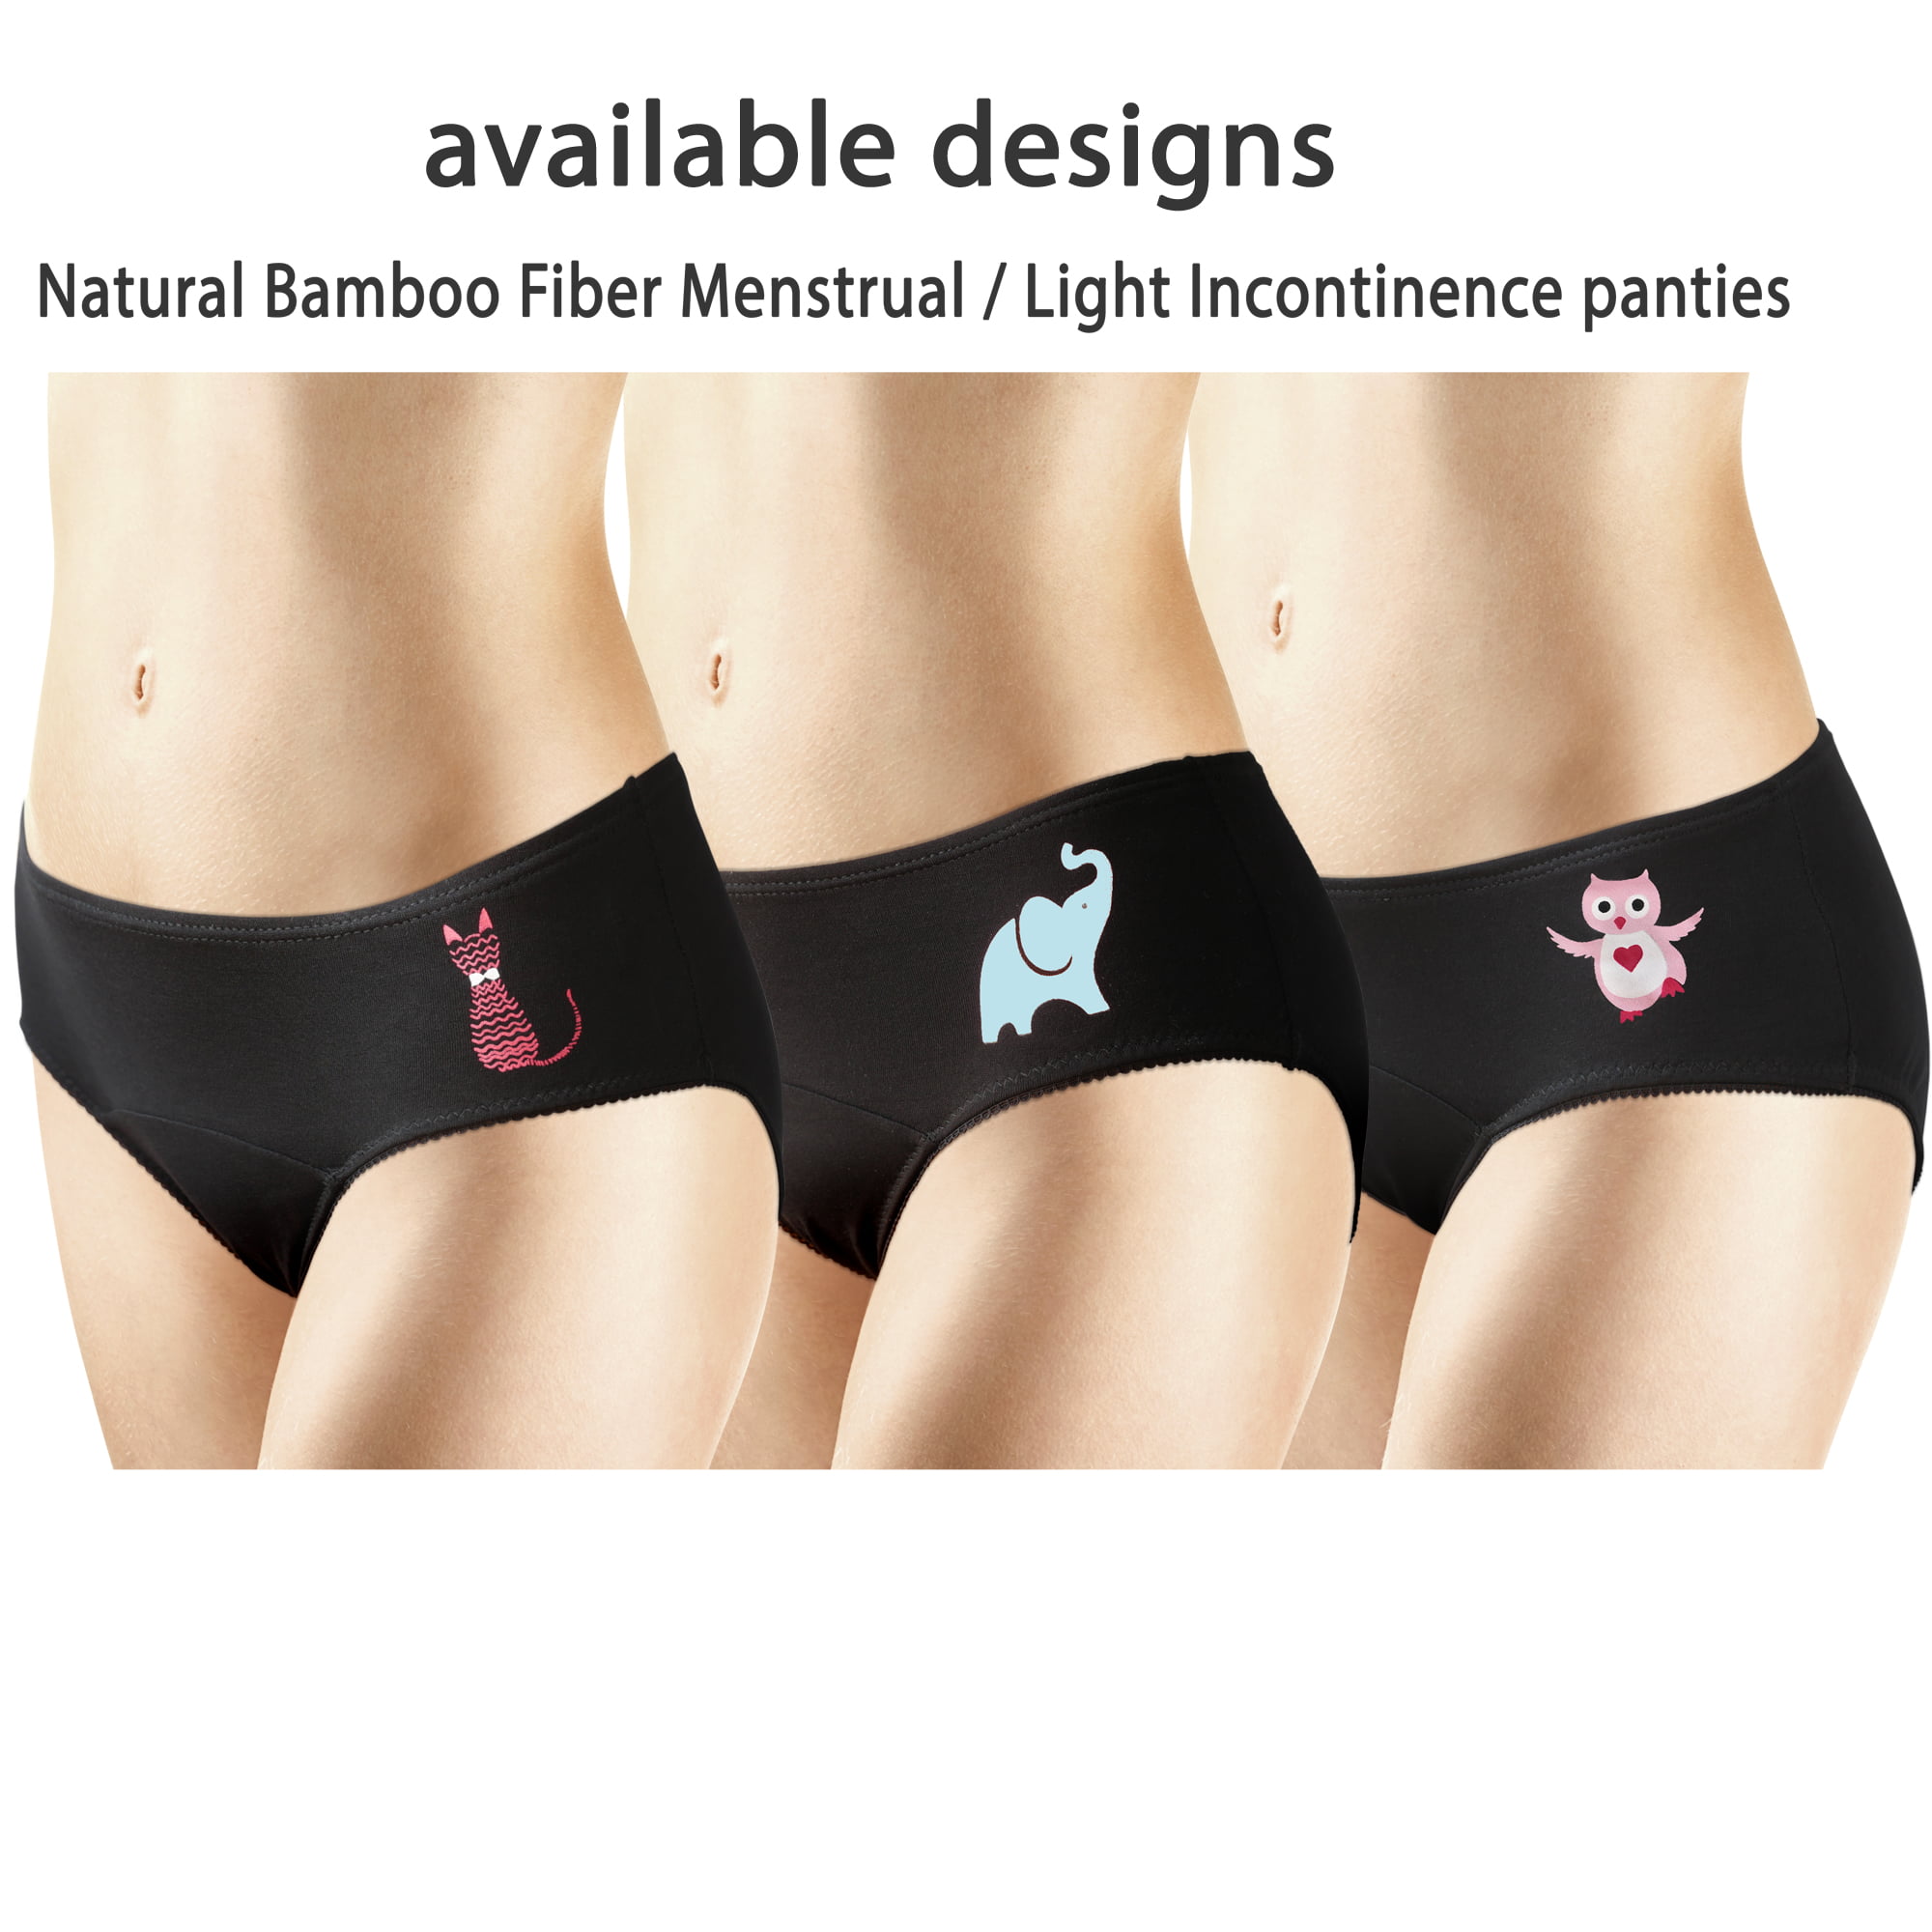 Lavos Bamboo Period Panty, Reusable Period Underwear, Leakproof Menstrual  Panties LW1005-No Stain-Navy